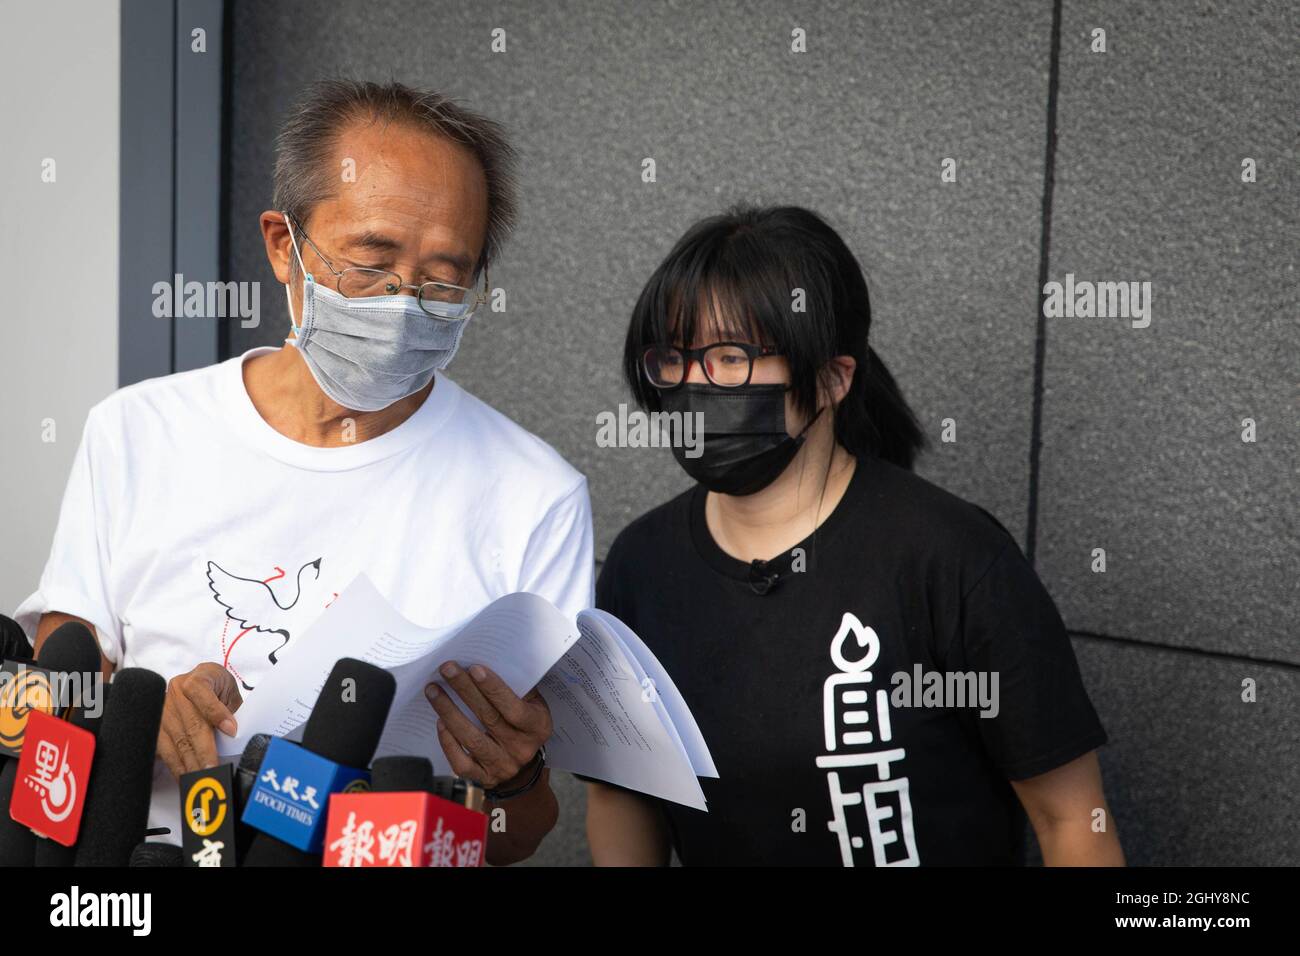 The Vice-chairwoman of Hong Kong Alliance, Chow Hang-Tung is seen consulting with a standing committee member before handing in their rejection letter to national security police.Standing committee members of the Hong Kong Alliance in Support of Patriotic Democratic Movements of China have rejected information request on its membership, finances and operations, and went to Hong Kong Police Headquarters to officially hand in their rejection letter. The secretary of security Chris Tang Ping-keung later spoke to the press this afternoon on the issue, claiming officials will take legal action soon Stock Photo